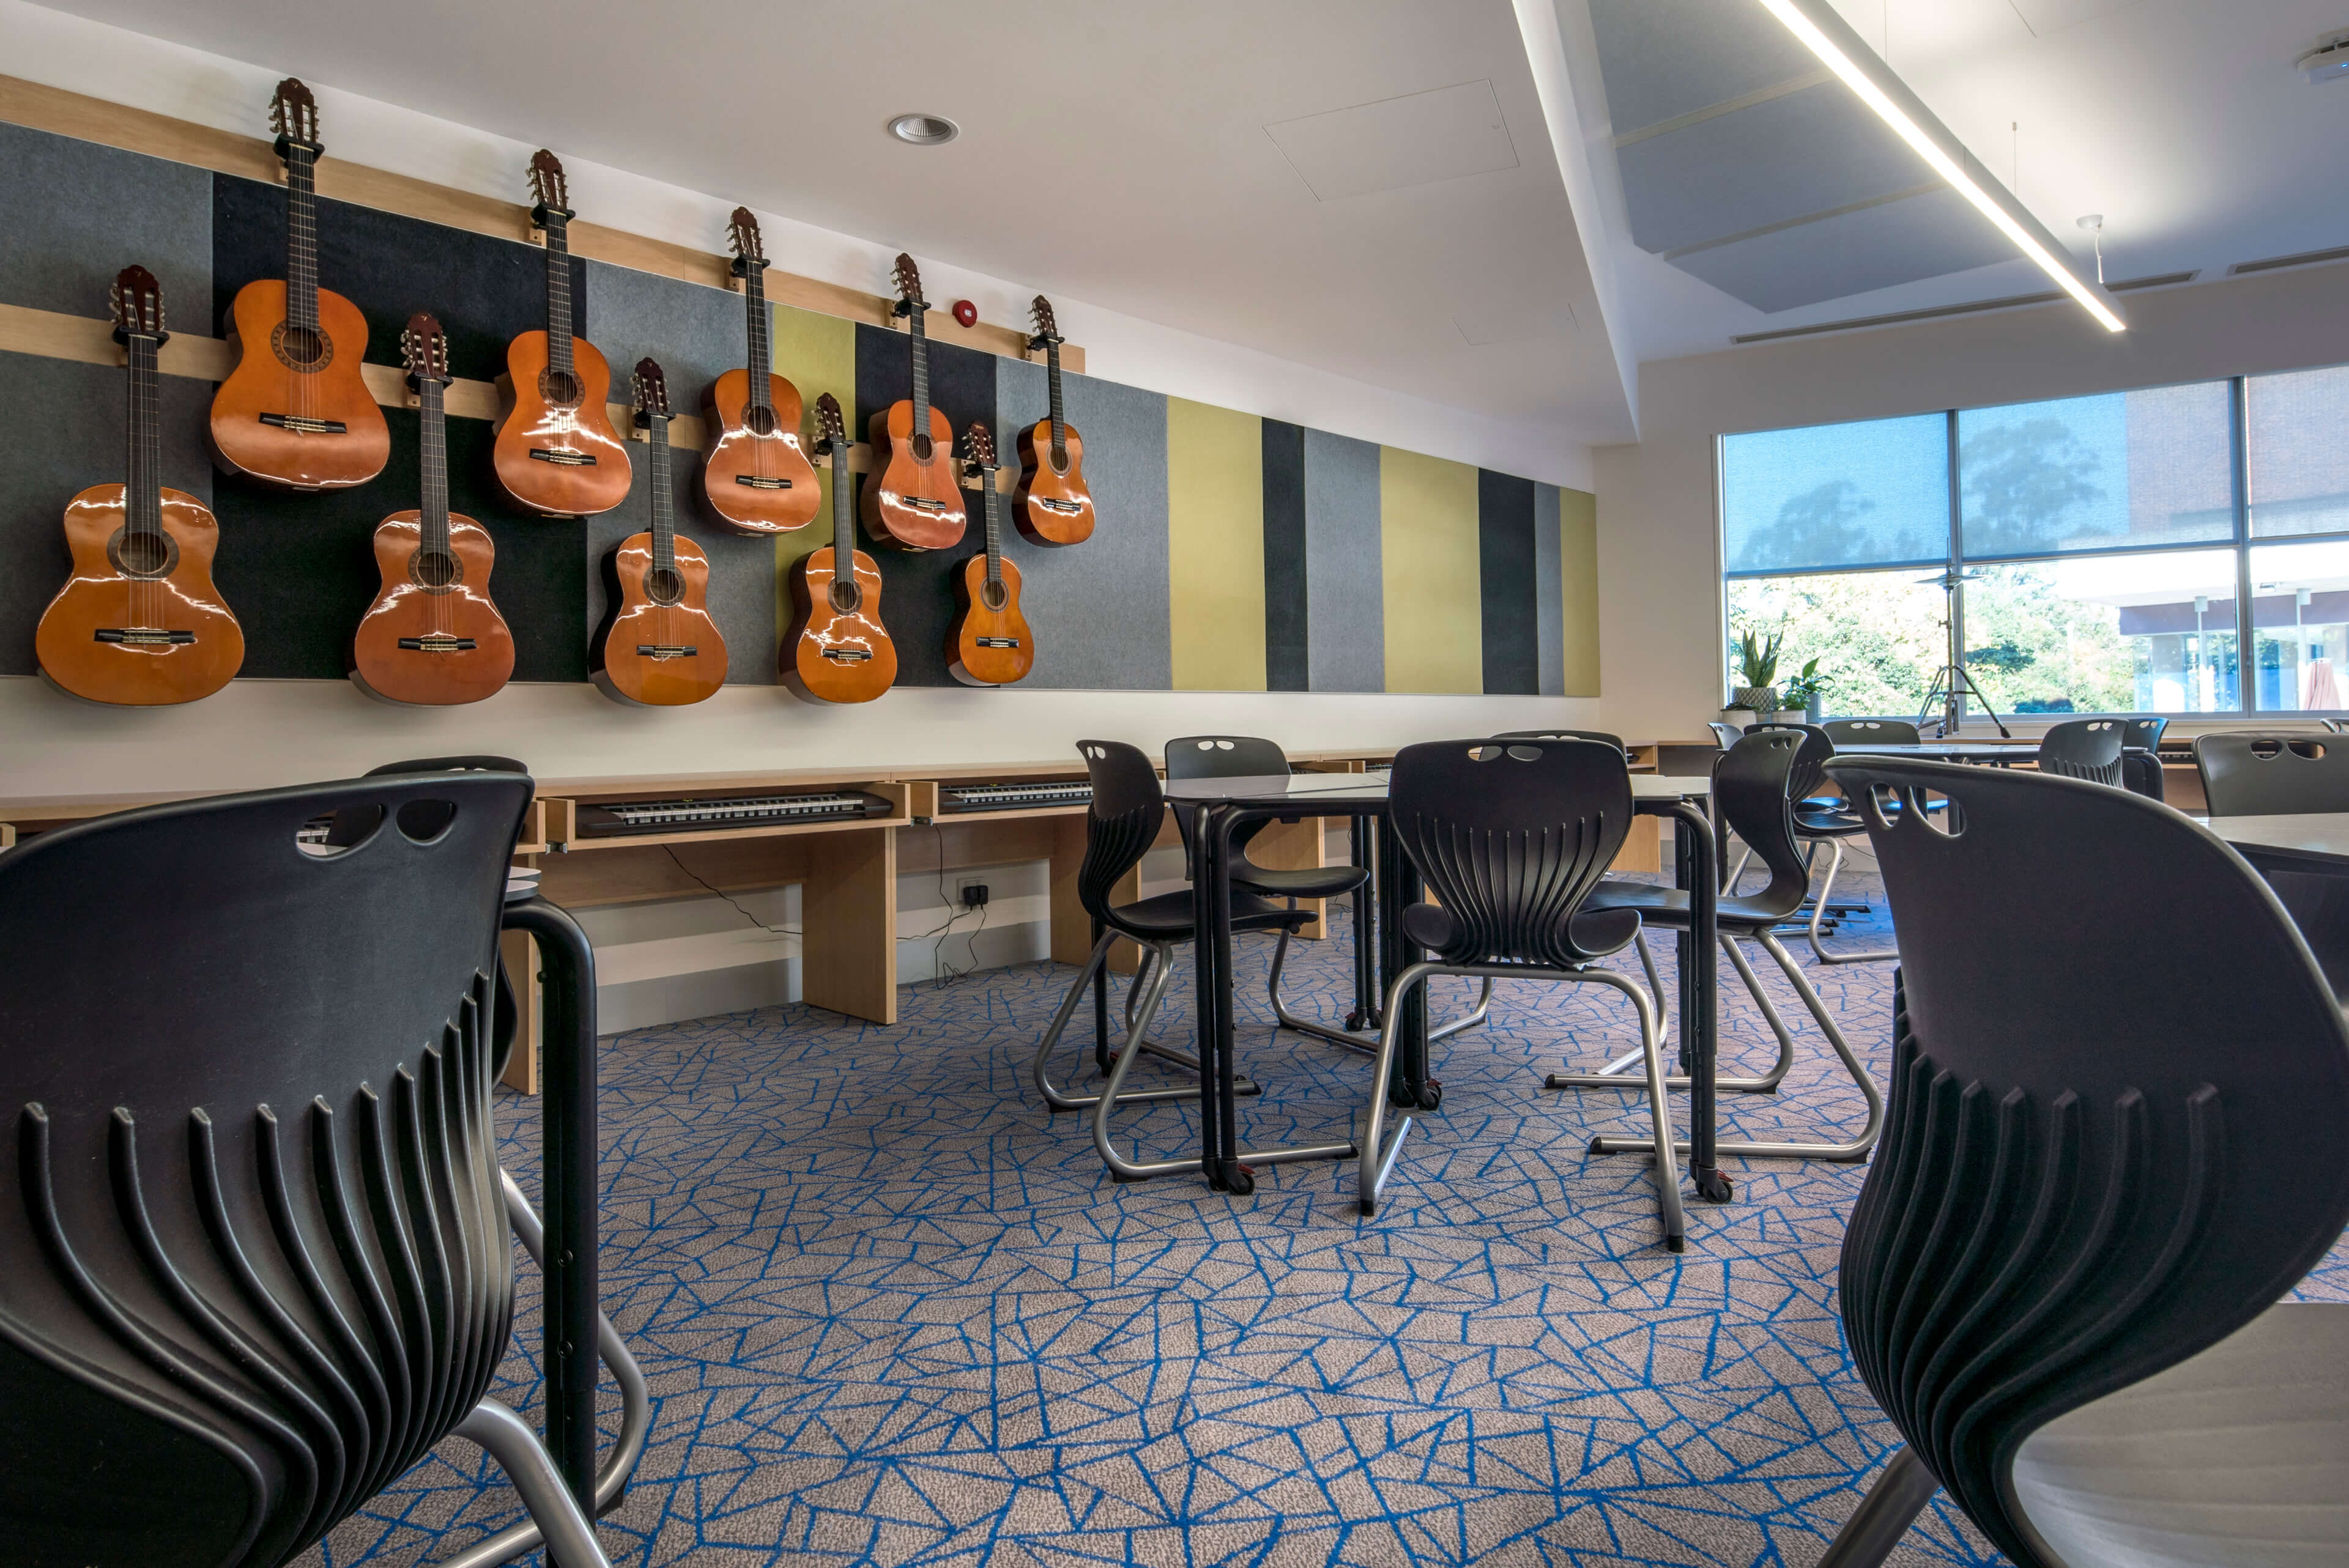 16 guitars on the wall of a specialised music classrooms at knox performing arts centre taylor construction education